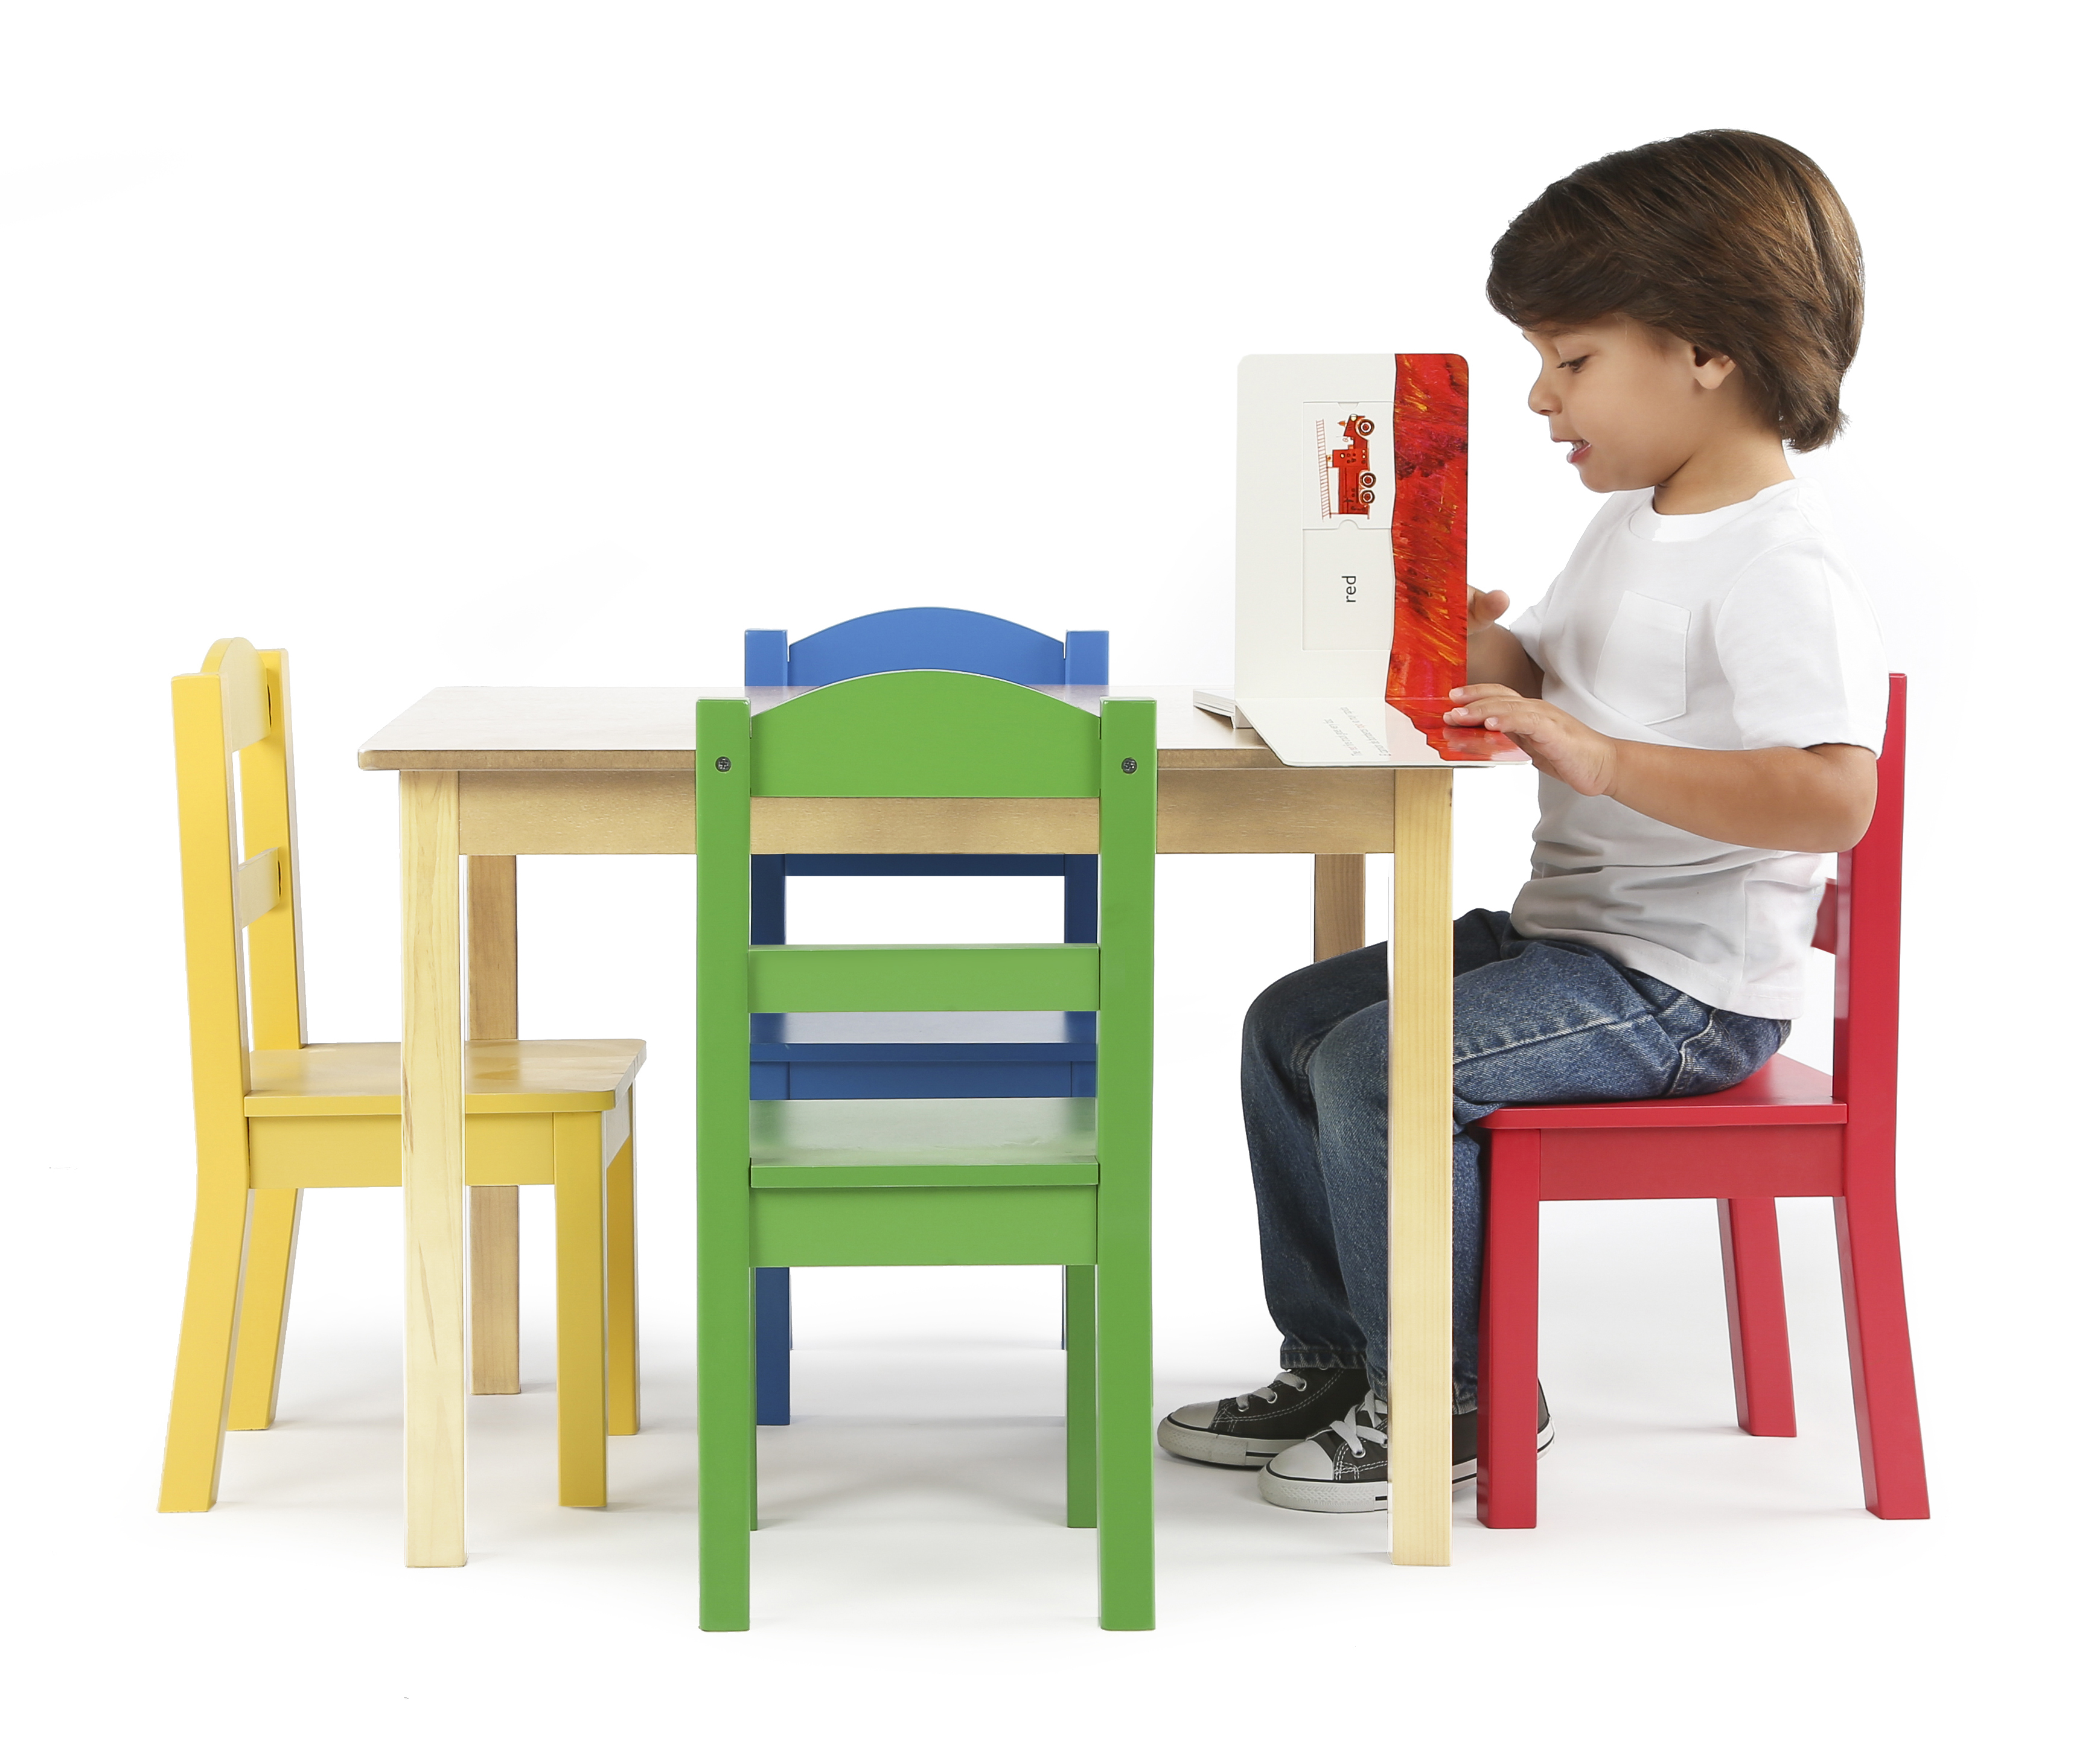 Humble Crew Primary Kids Wood Table and 4 Chairs Set, Natural Wood/Primary, for kids ages 3+ - image 5 of 5